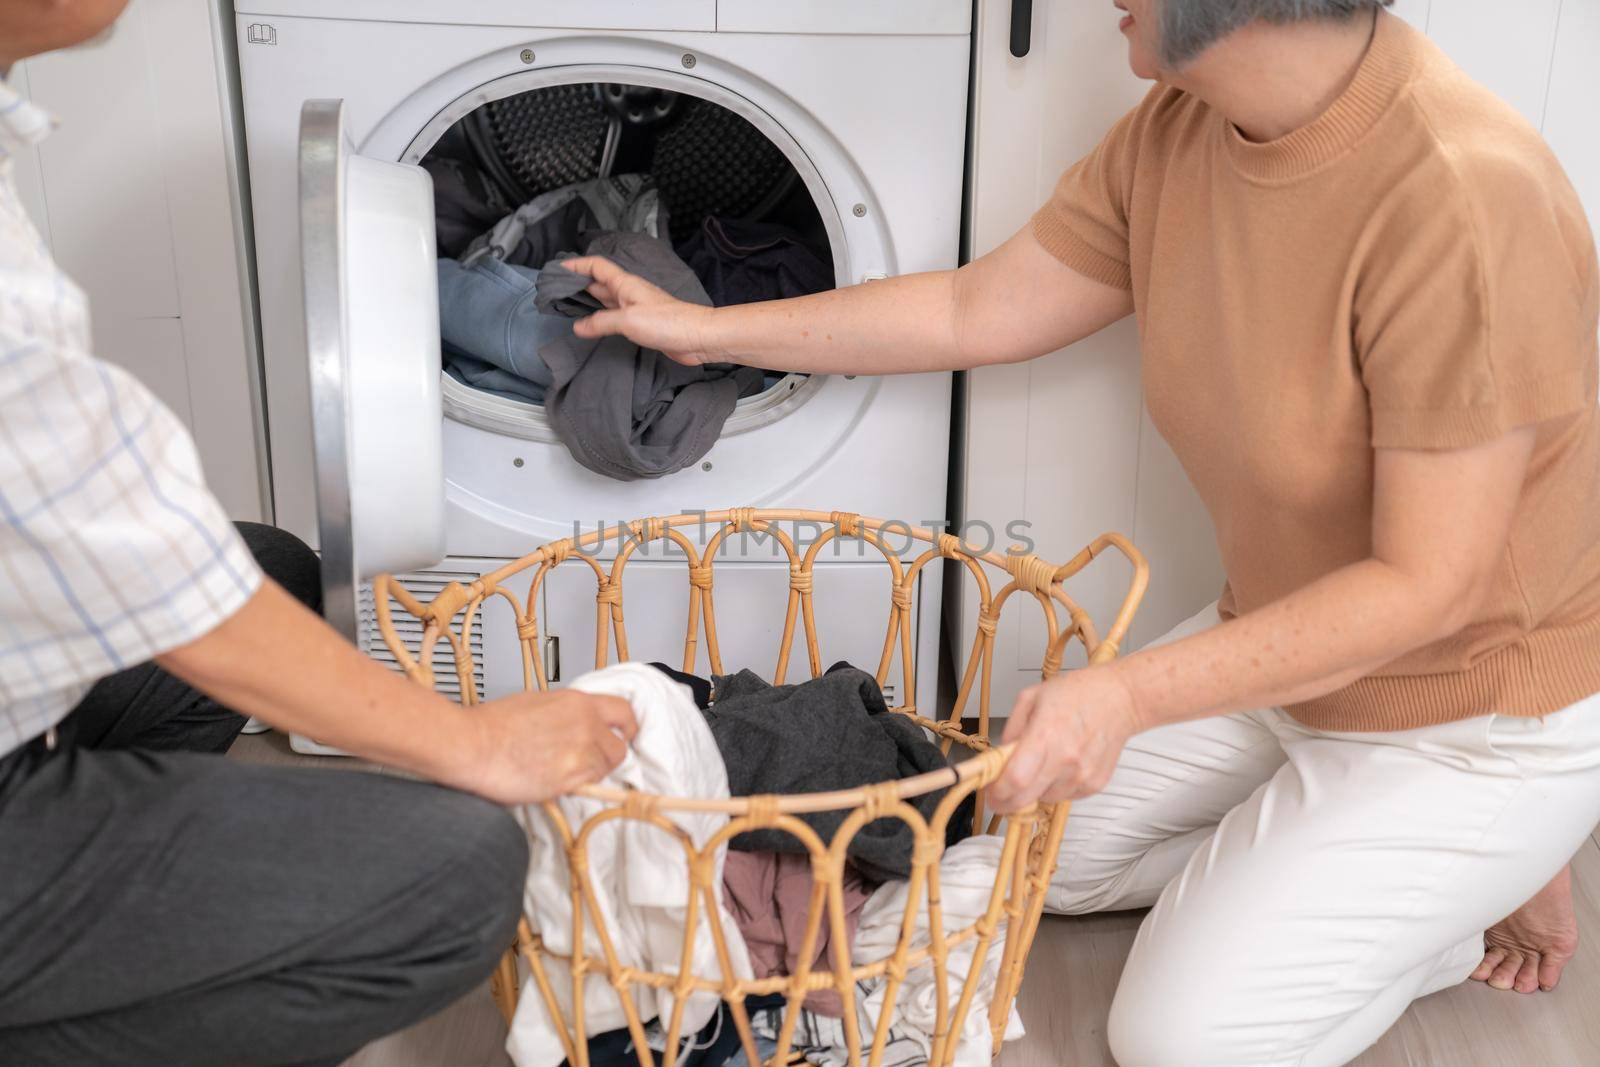 Senior couple working together to complete their household chores at the washing machine in a happy and contented manner. Husband and wife doing the usual tasks in the house.